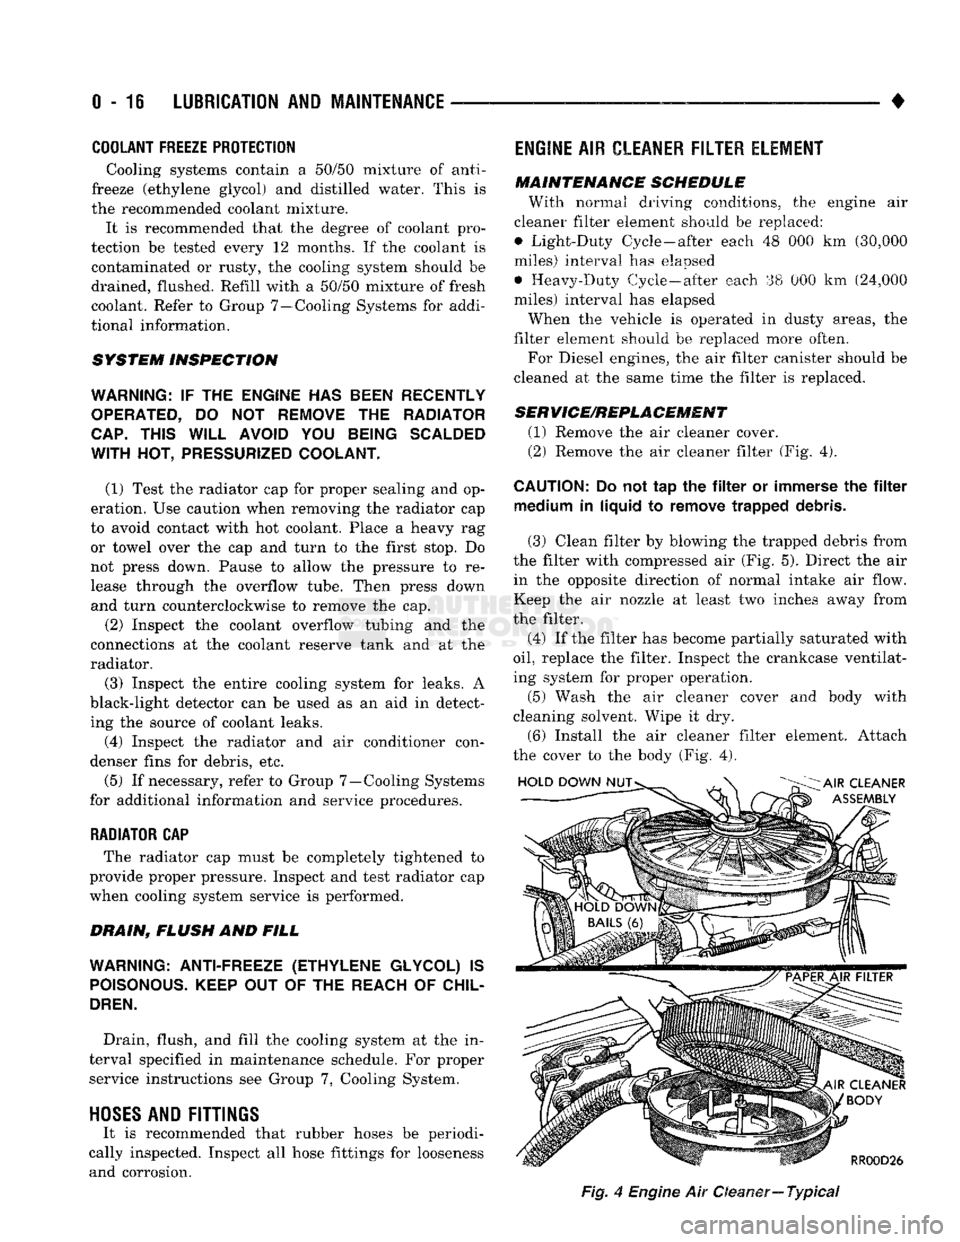 DODGE TRUCK 1993  Service Repair Manual 
0-18
 LUBRICATION
 AND
 MAINTENANCE 

• 
COOLANT FREEZE PROTECTION 

Cooling systems contain a 50/50 mixture of anti­
freeze (ethylene glycol) and distilled water. This is 
the recommended coolant